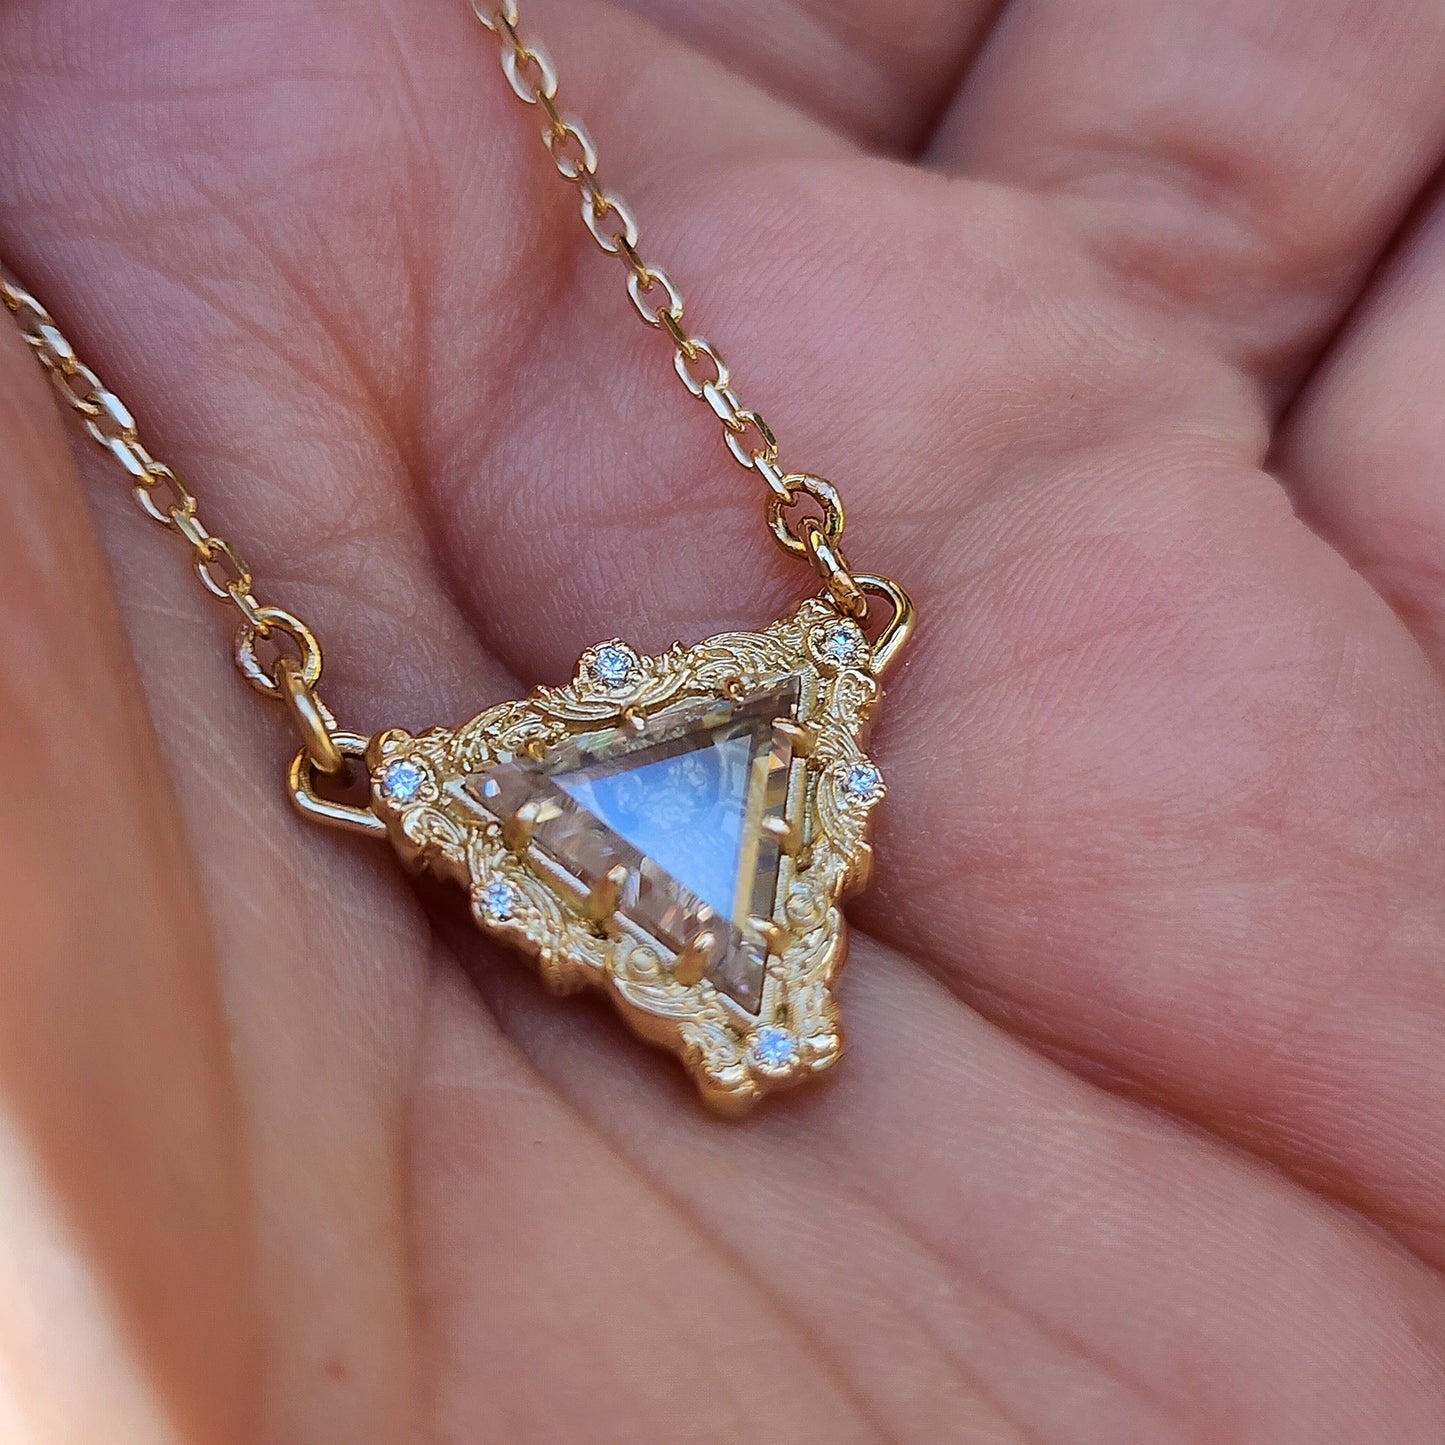 Vampire Bat Pendant with Triangle Moissanite Window Pane and Baroque Gold Frame on Star Chain 14k Yellow Gold